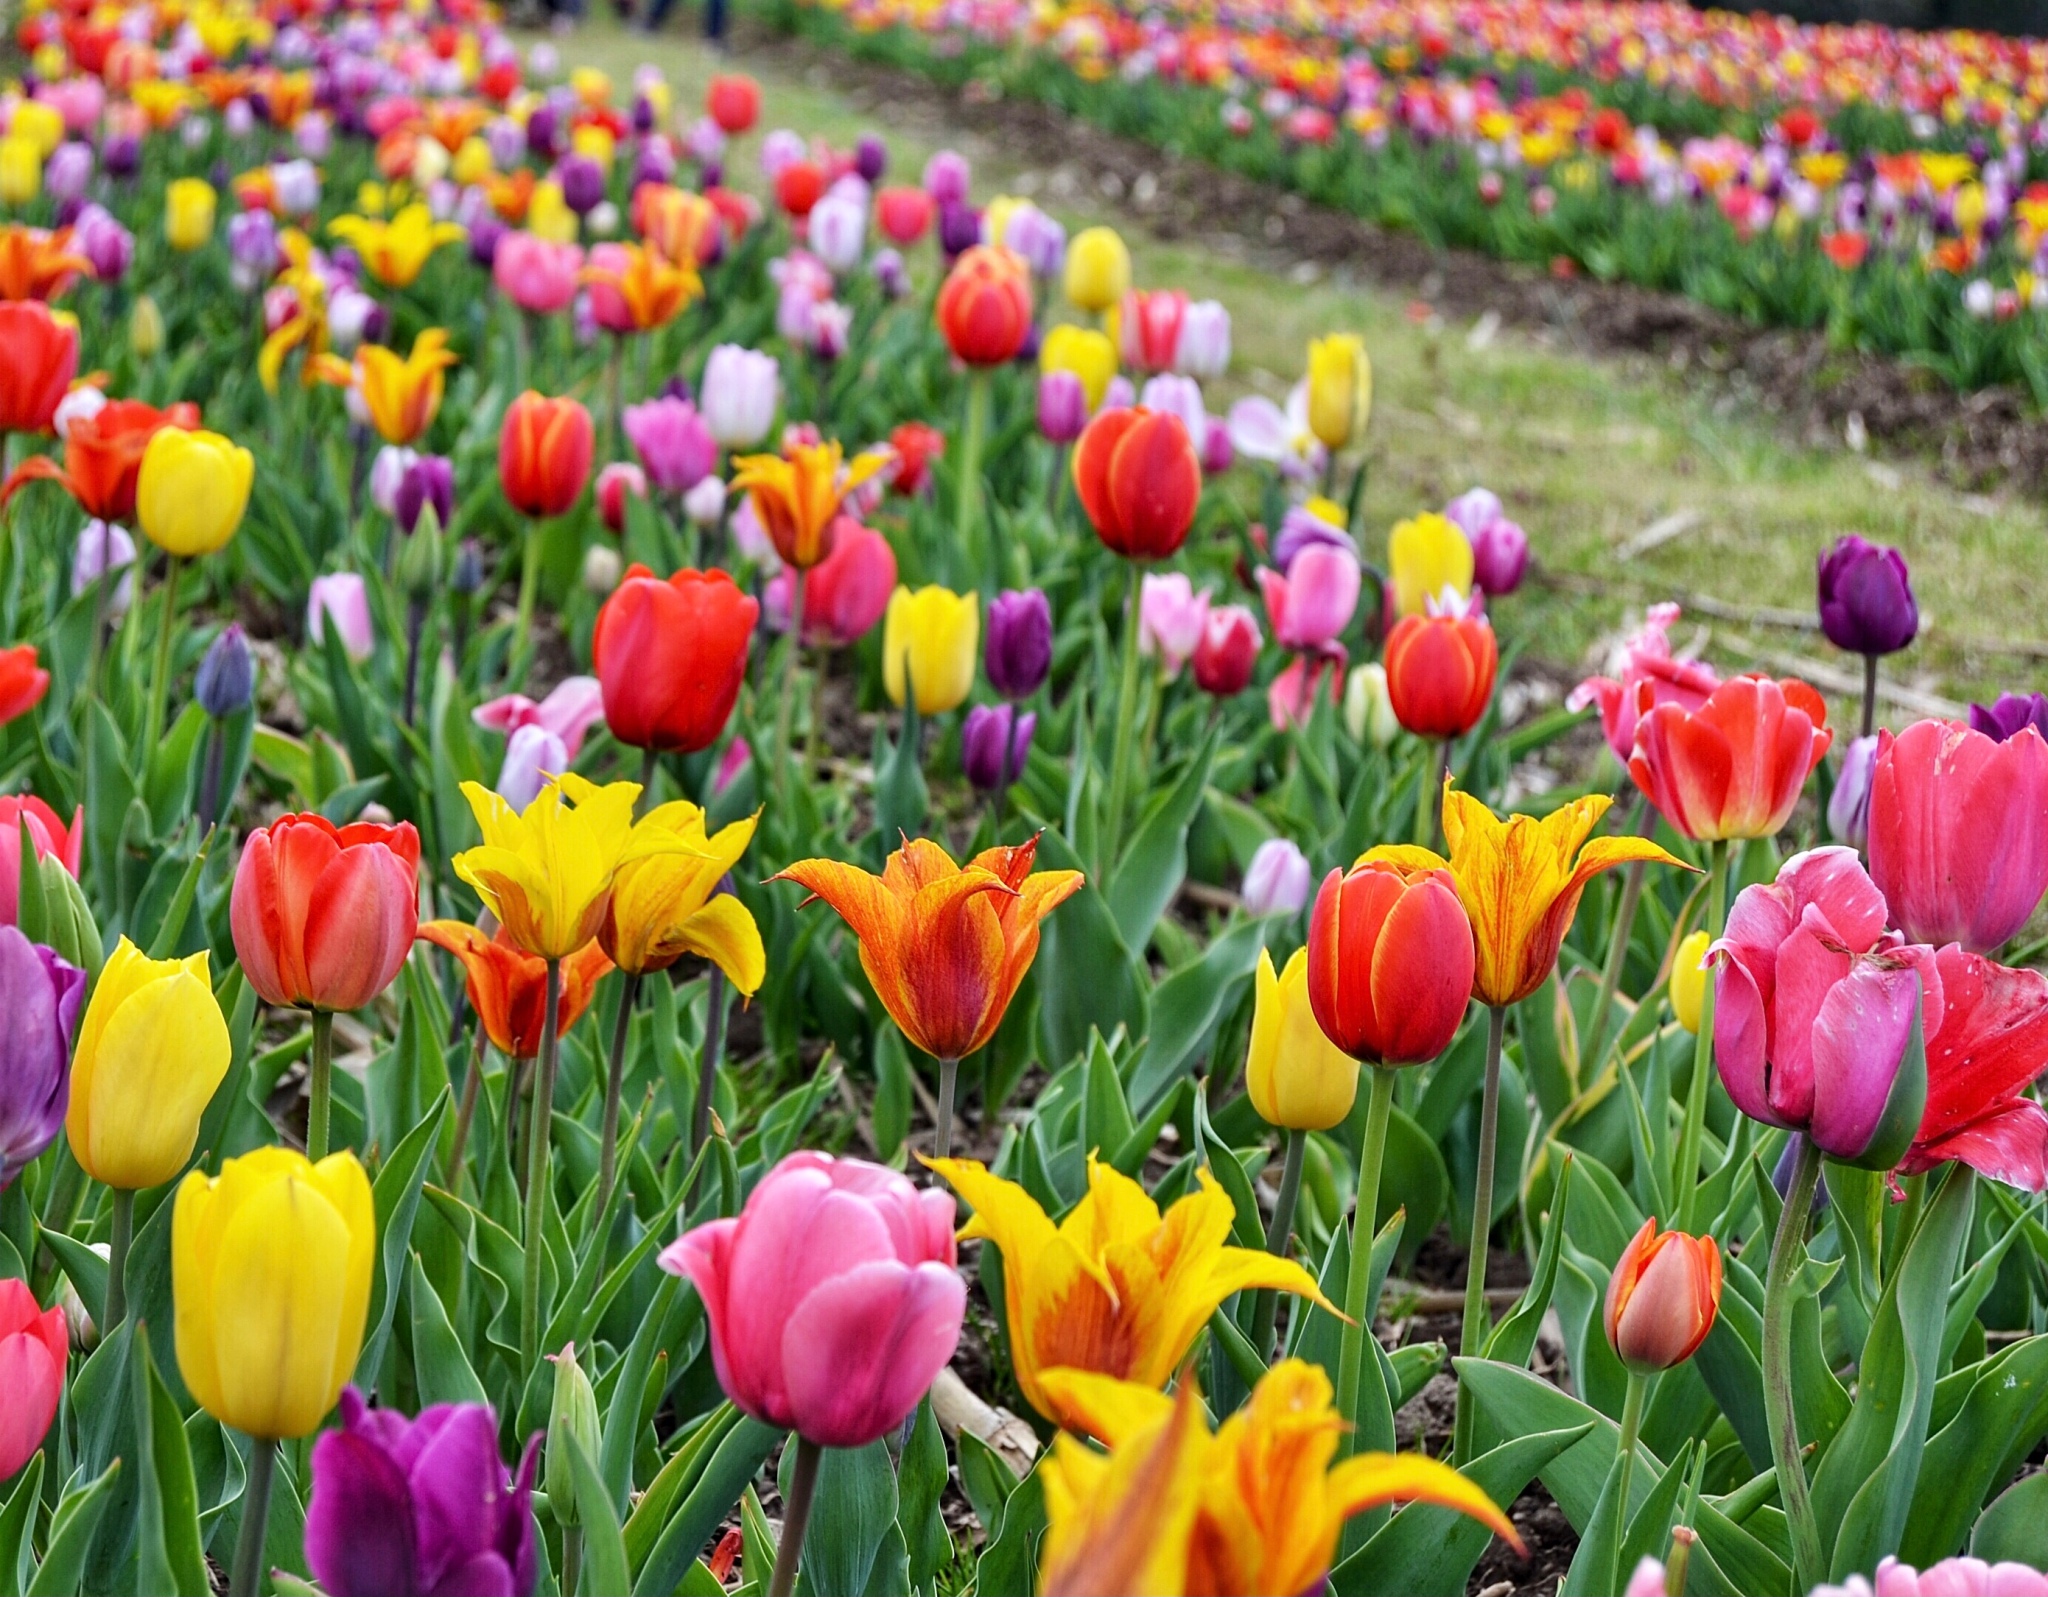 Things To Do In Virginia; Visit A Tulip Farm – Let’s Just Go!